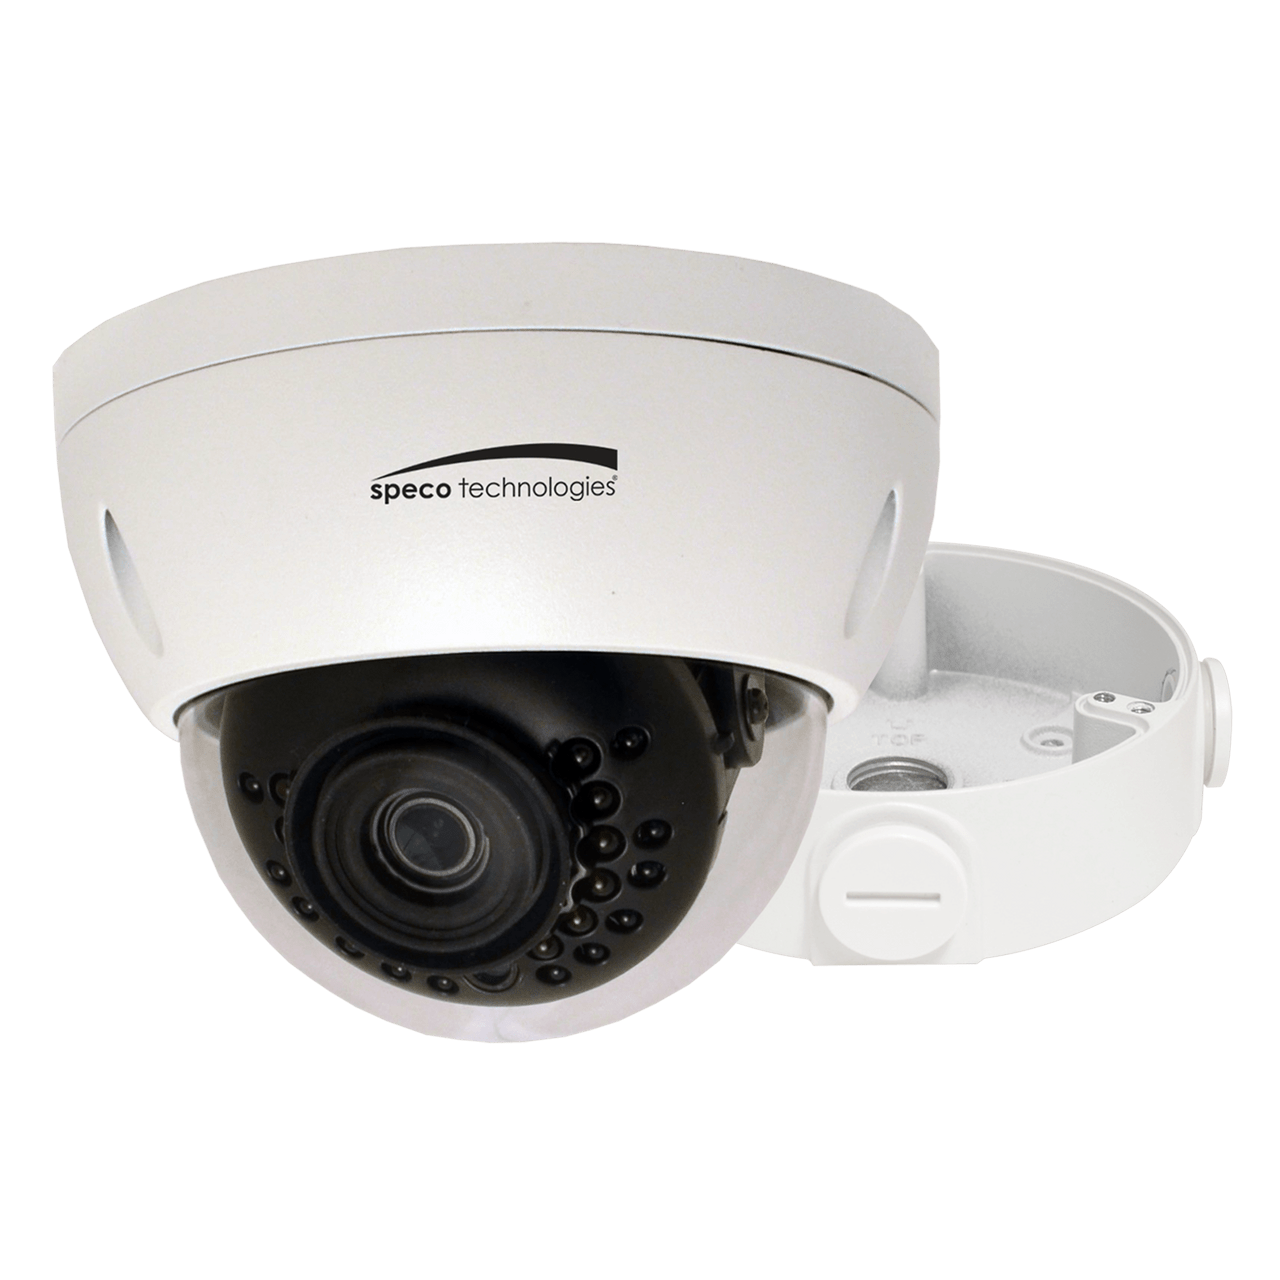 Speco Technologies O4VLD1 4MP Dome IP Camera, IR, 2.8mm lens, white housing, Included Junc Box (O4VLD1)